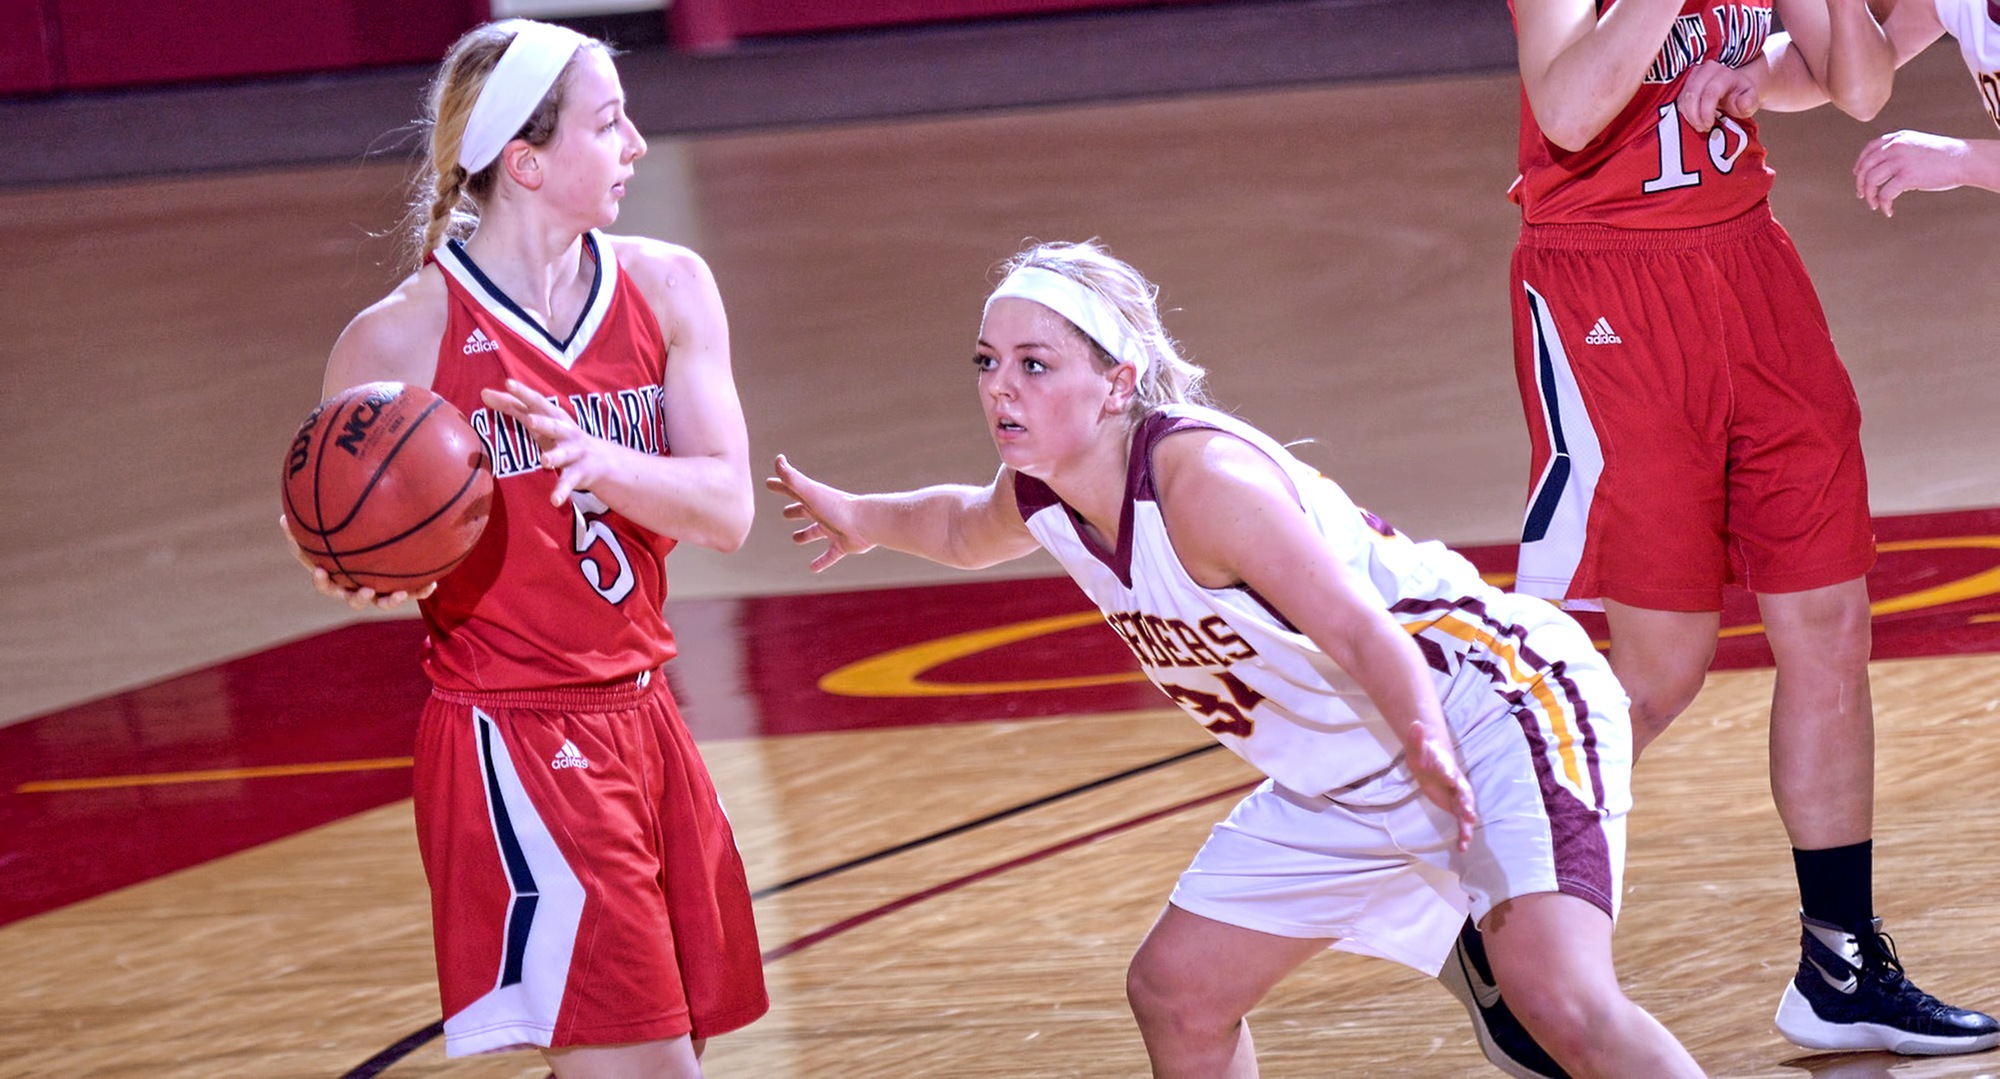 Junior Grace Wolhowe plays defense in the third quarter of the Cobbers' game with St. Mary's. She finished with nine points, four rebounds and three assists.